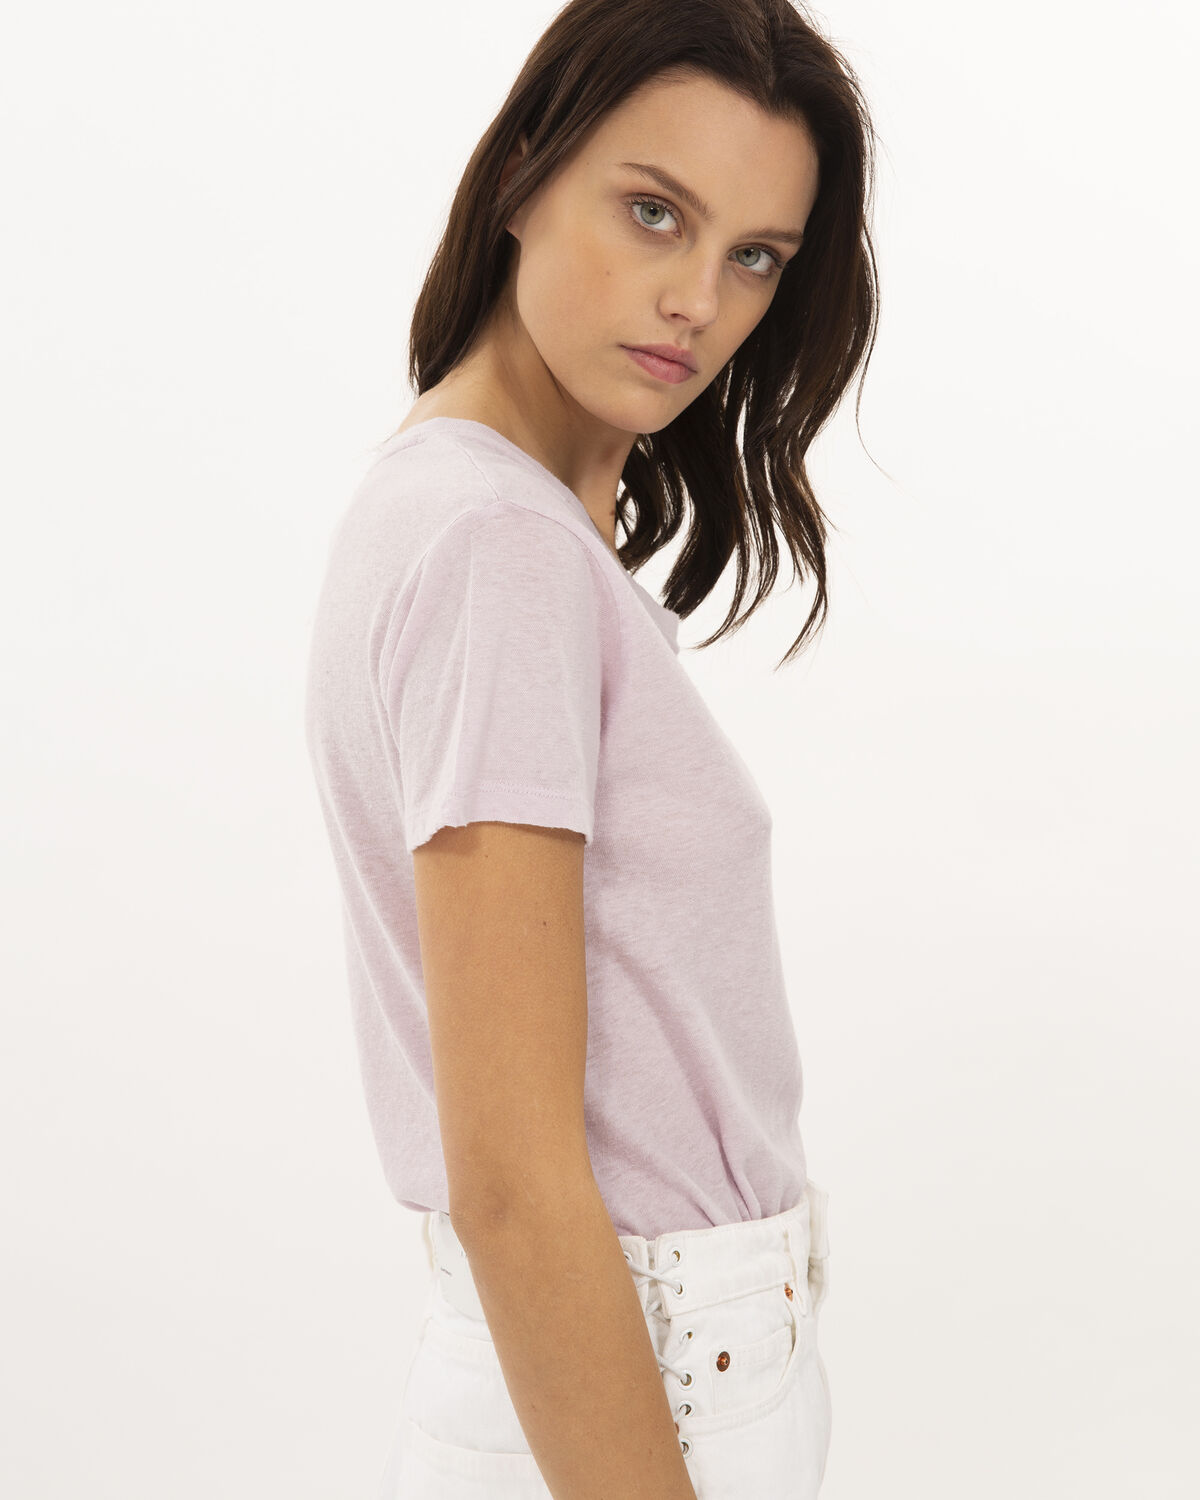 Photo of IRO Paris Strand T-Shirt Light Lavender - A Real Must Have In The Women's Wardrobe, This T-shirt Is A Blend Of Cotton, Linen And Silk And Is Distinguished By Its Light Transparency And Round Collar. Wear It With White Jeans Or Shorts For A Summery And Casual Look. Spring Summer 19